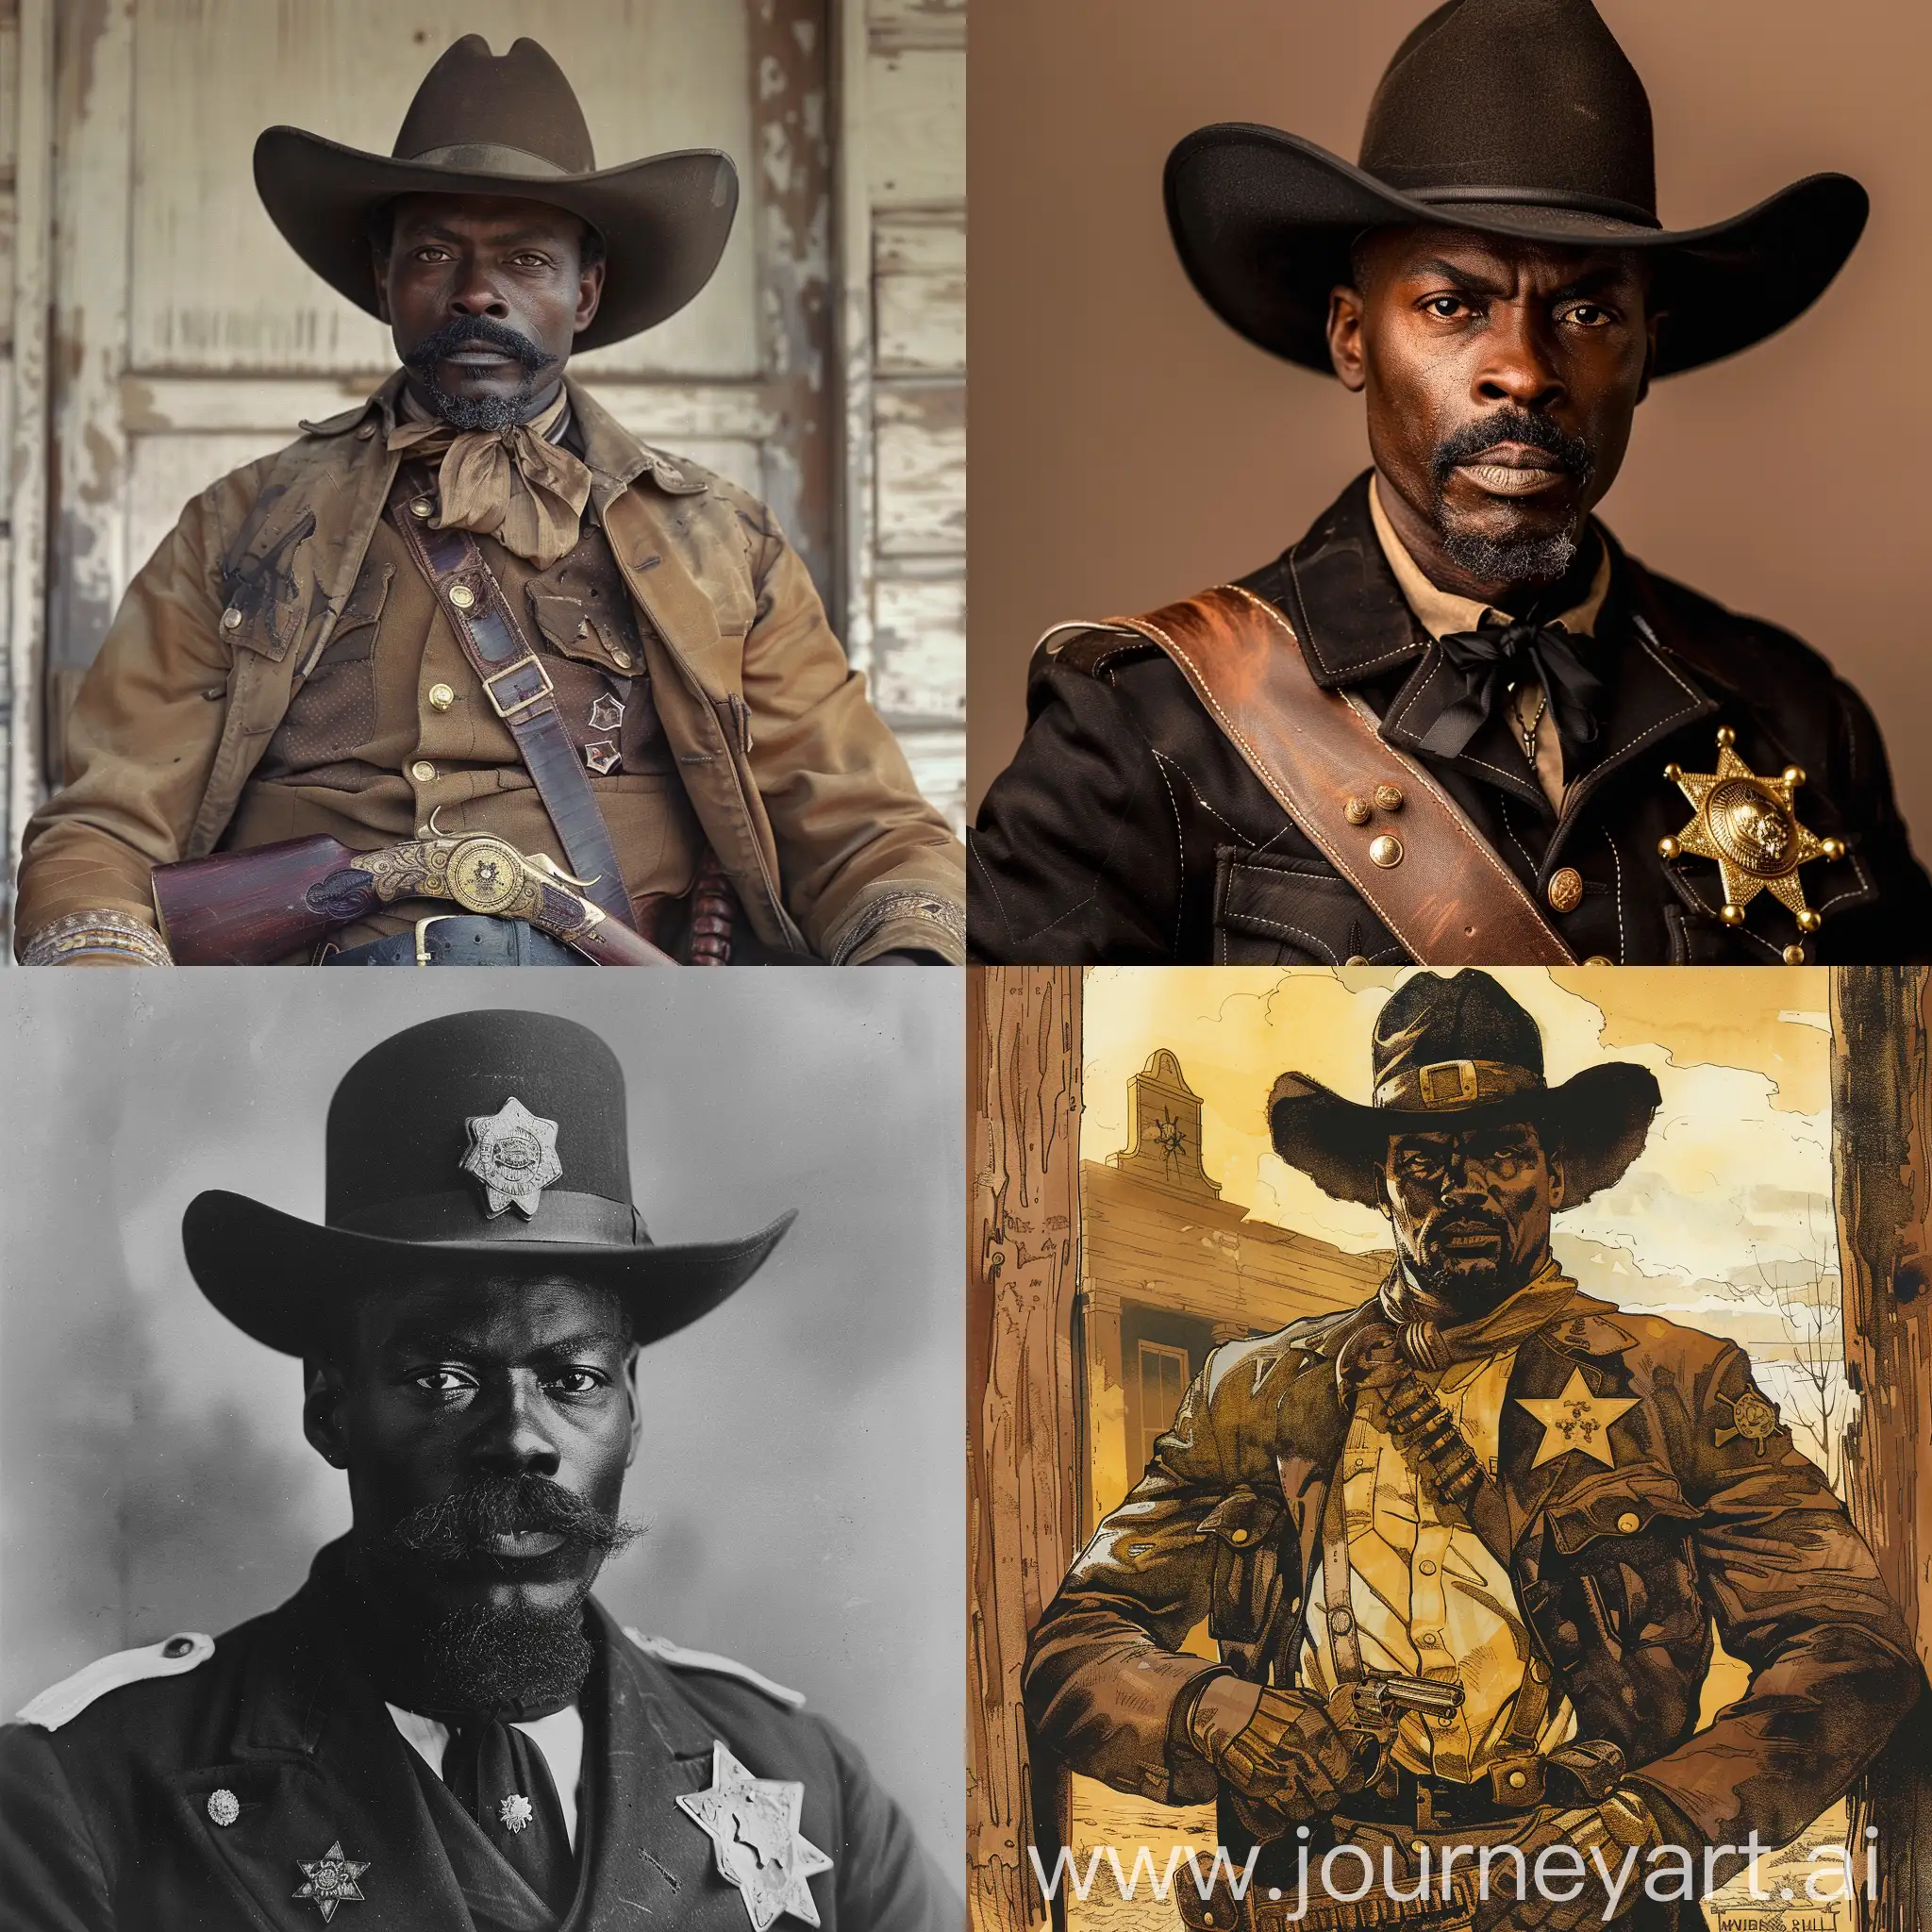 Black-Sheriff-in-the-Old-West-Lone-Protector-of-Law-and-Order